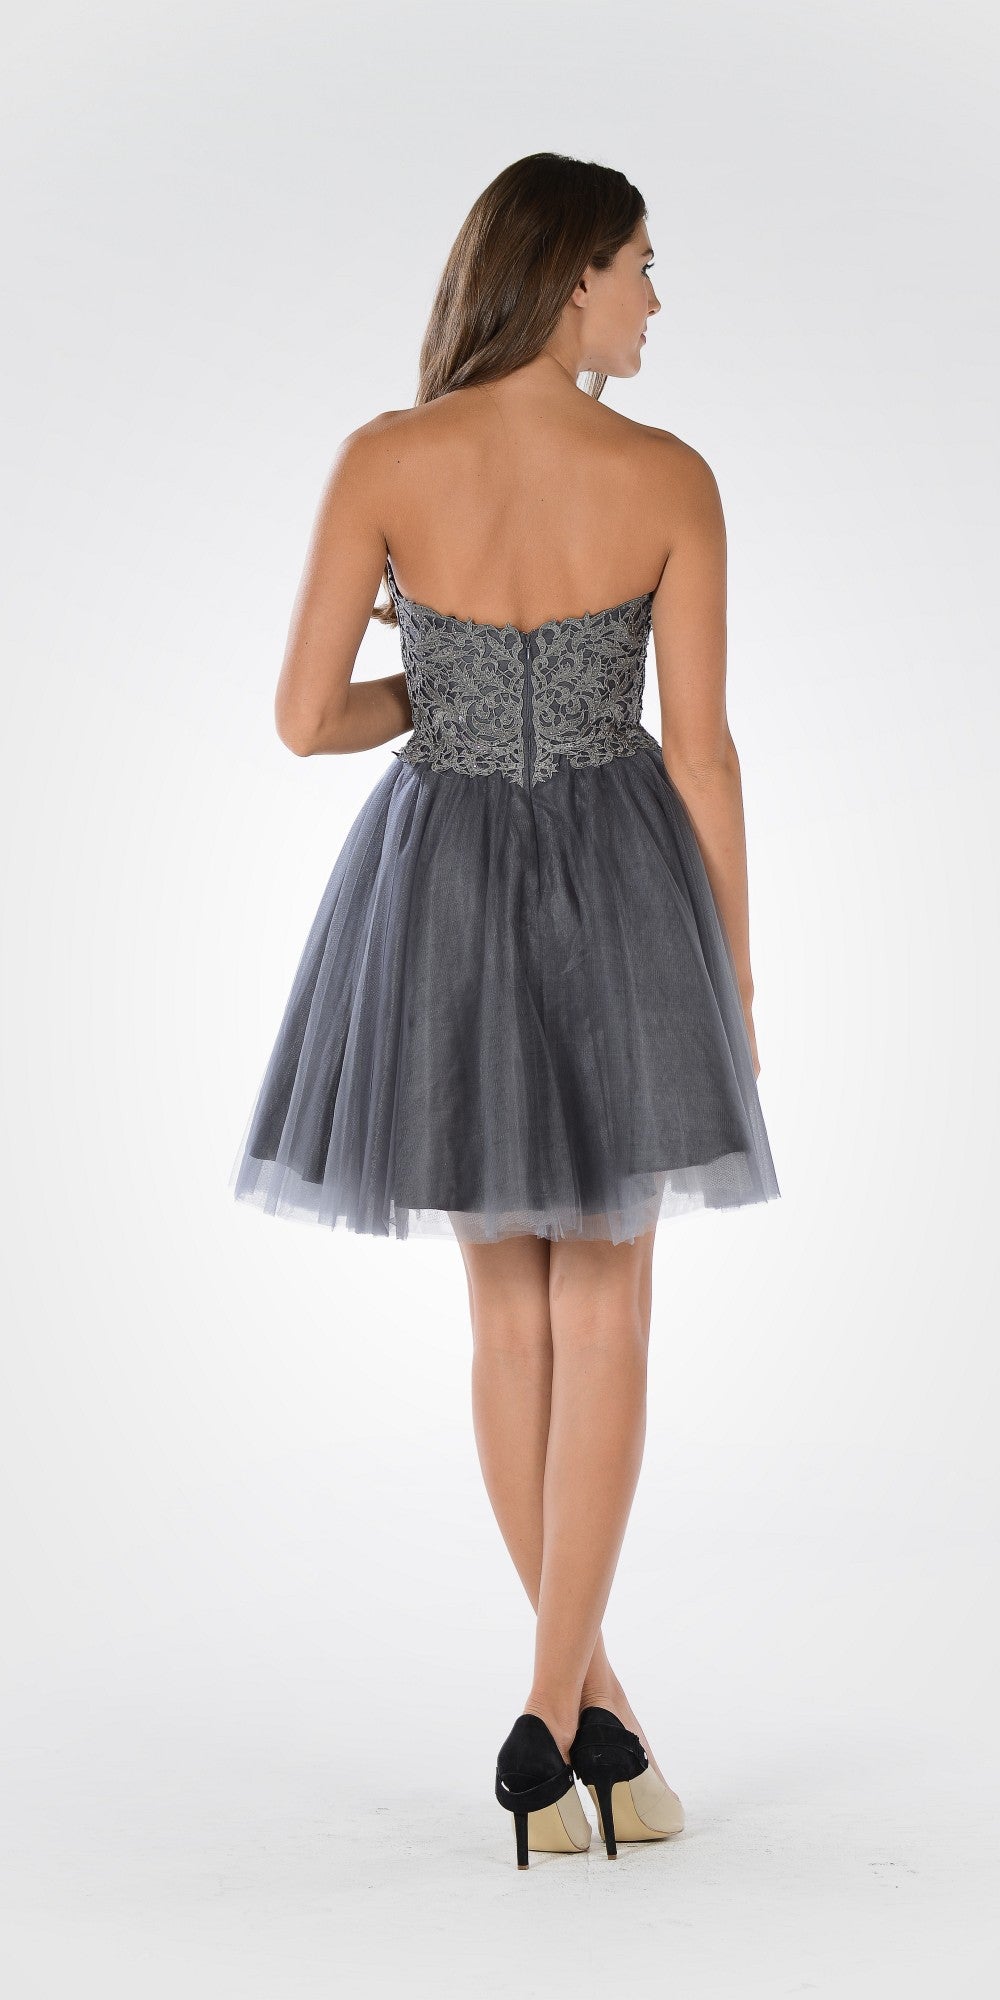 Poly USA 7718 - Lace Bodice Tulle Skirt A-line Homecoming Dress Strapless Charcoal